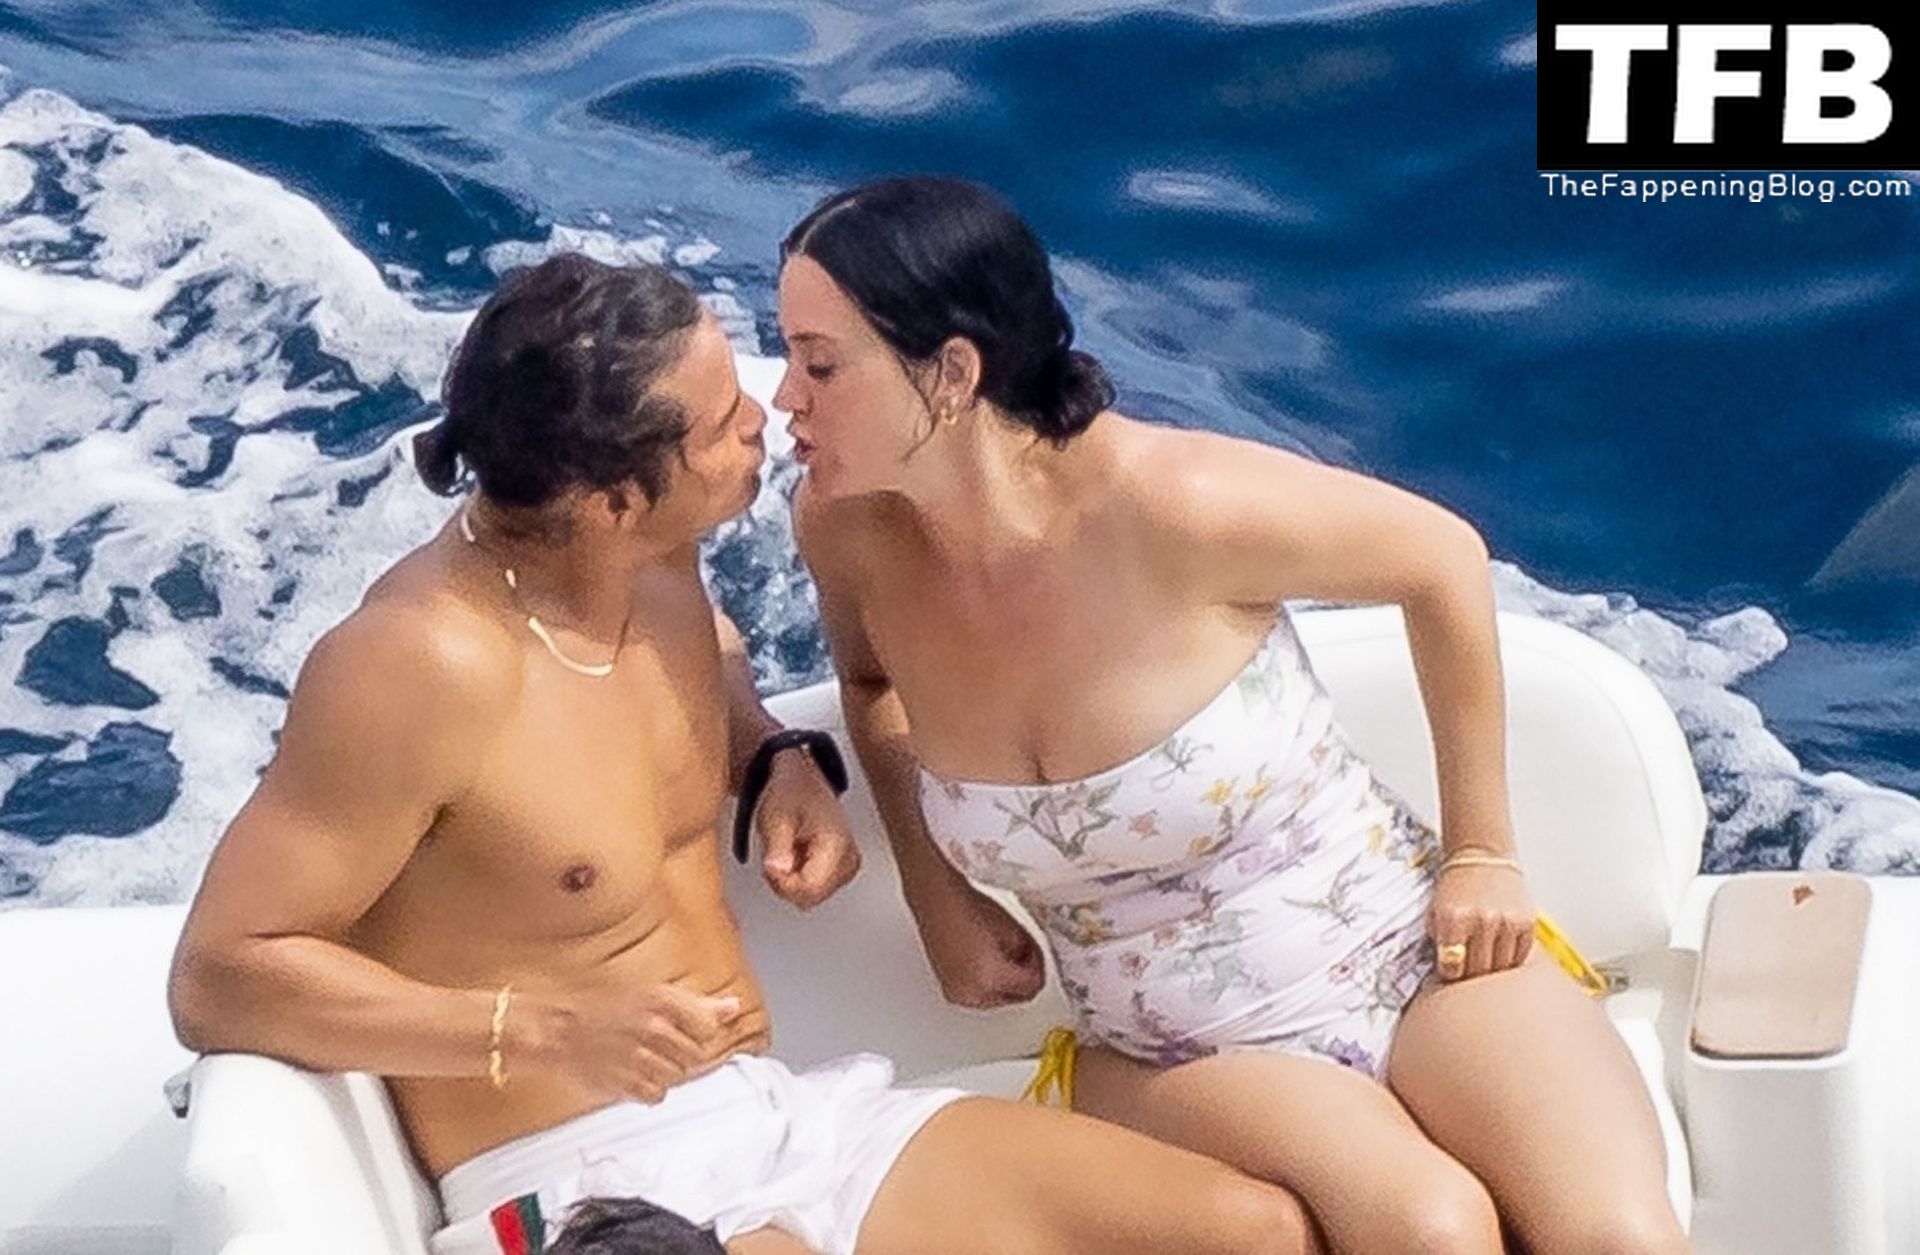 Katy Perry Sexy The Fappening Blog 2 - Katy Perry Rocks a Strapless Swimsuit While Enjoying a Beach Day with Orlando Bloom in Positano (105 Photos)